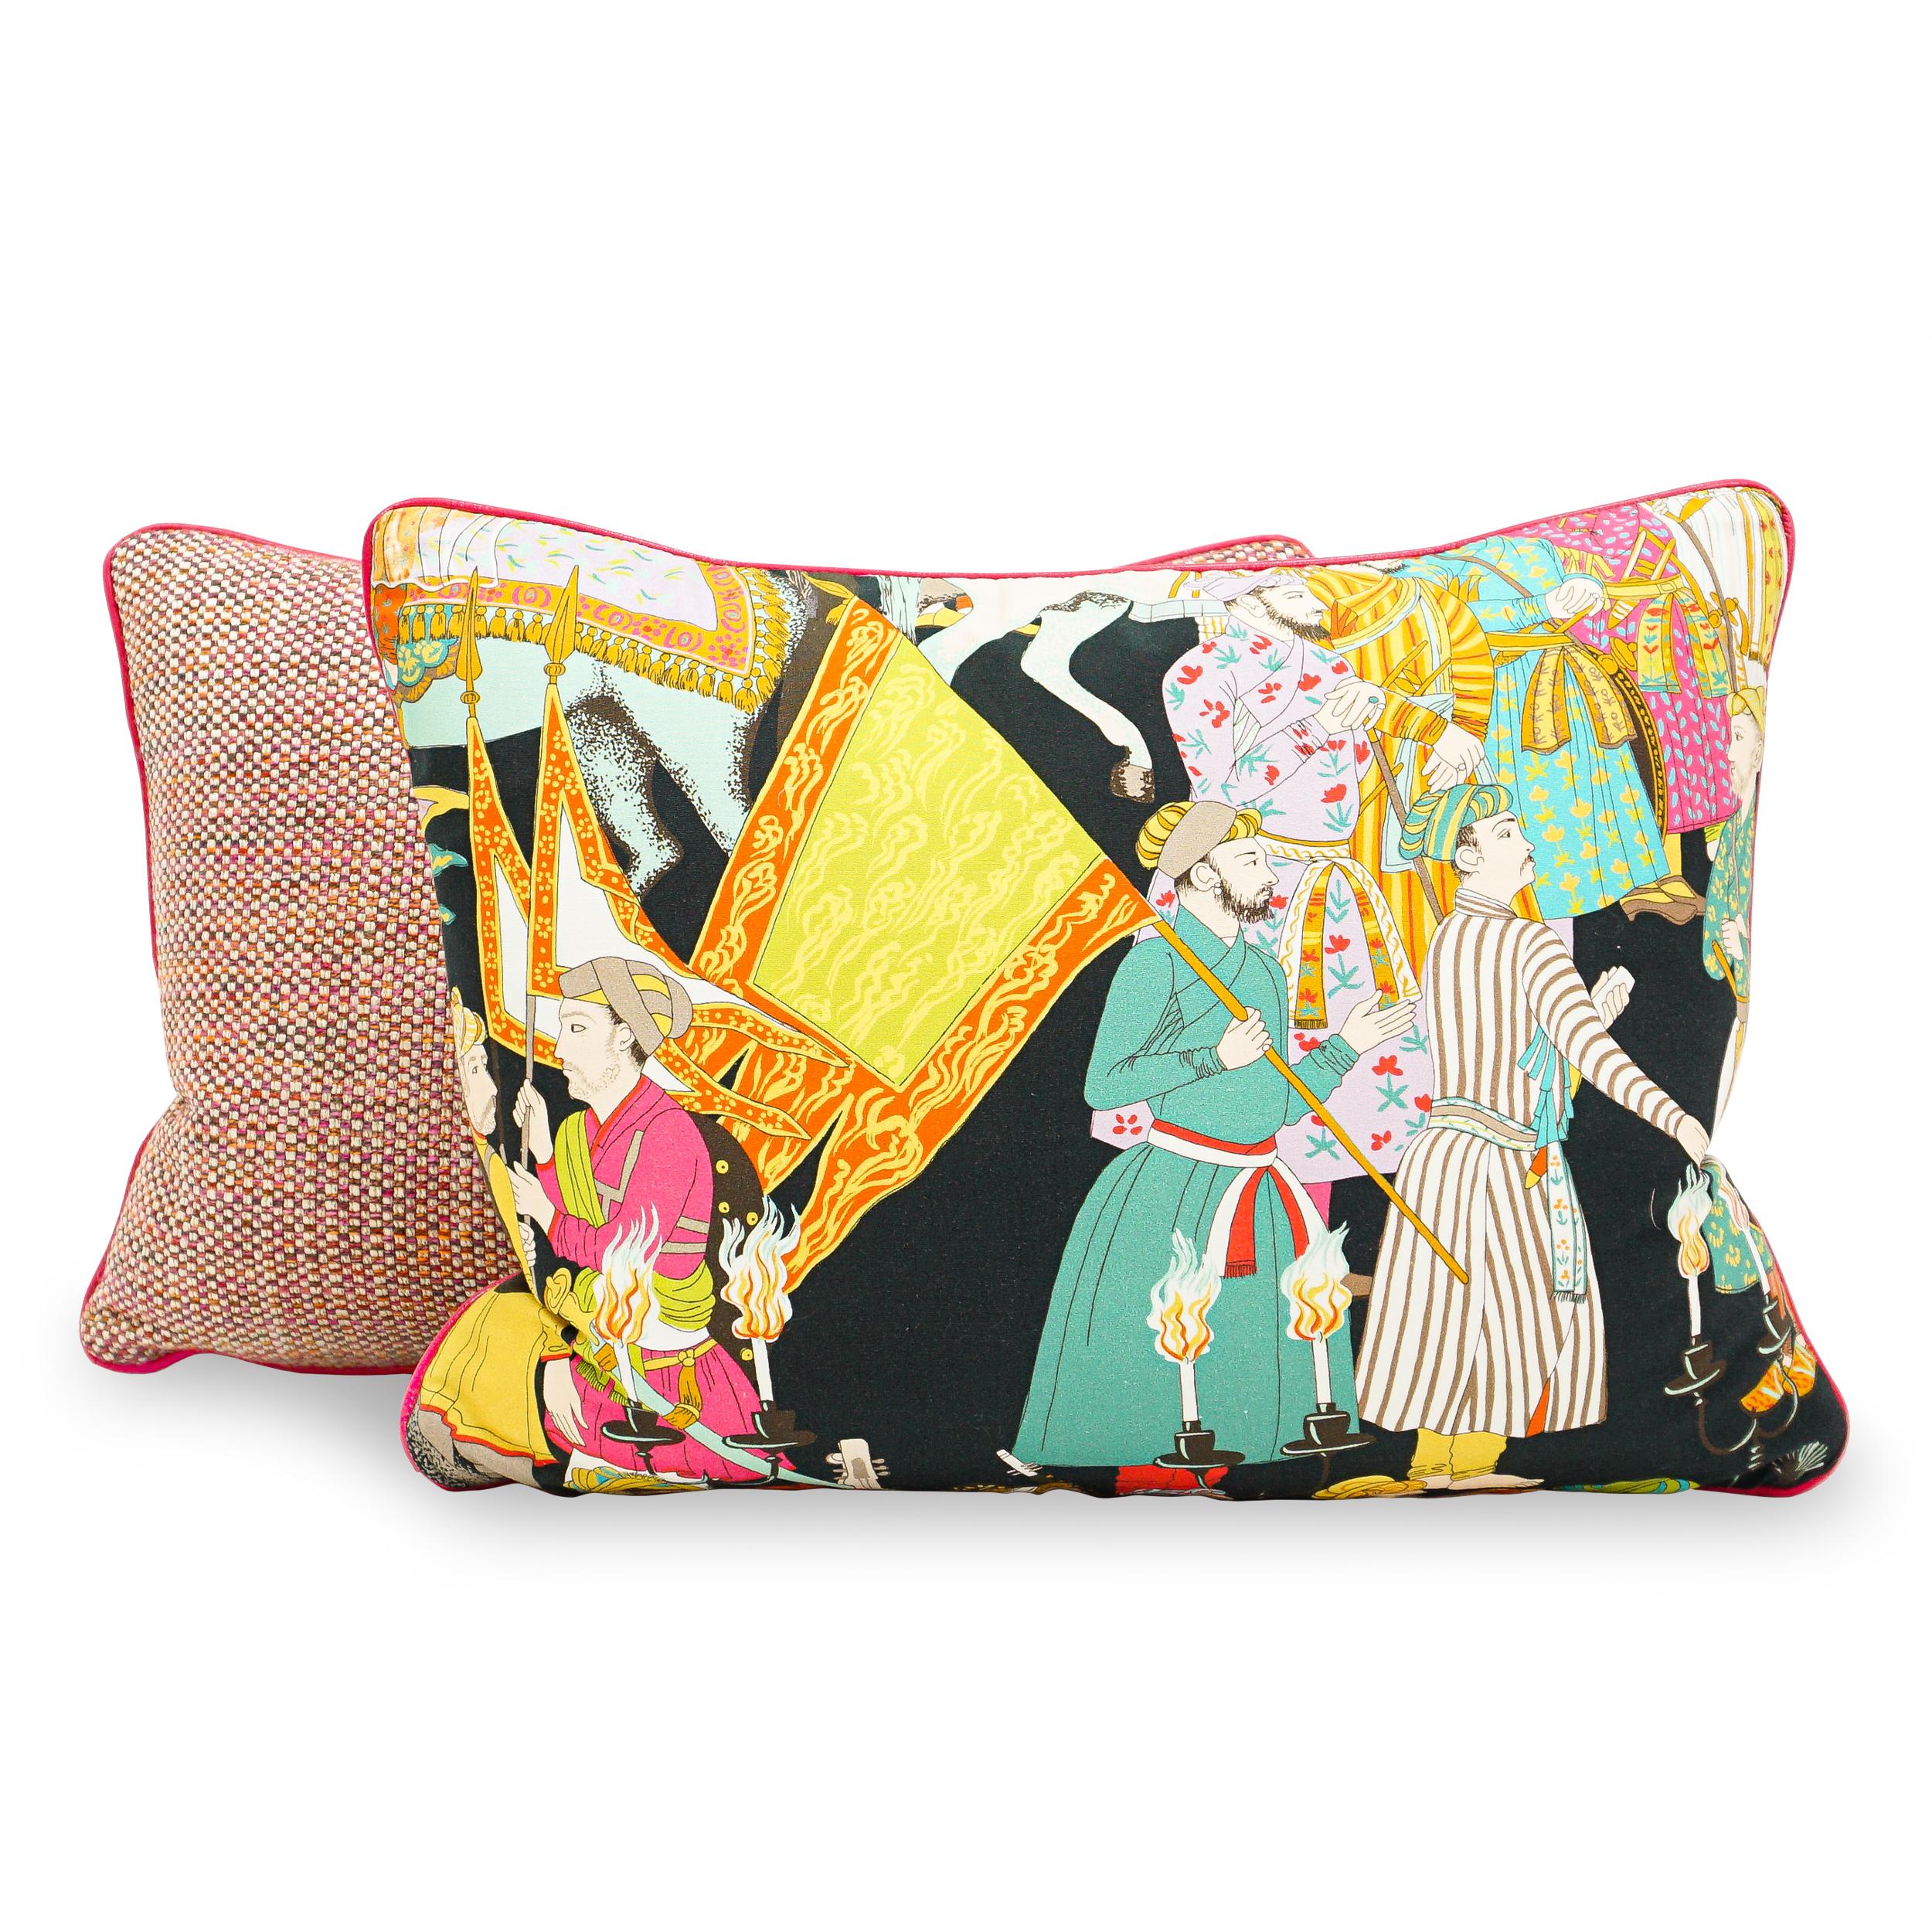 Colorful Manuel Canovas Indian Print on cotton on the front and a woven in similar colors on the back of this striking pillow. The finishing touch is the hot pink faux leather piping. Down/feather filled. 
Pillow can be made in any combination of